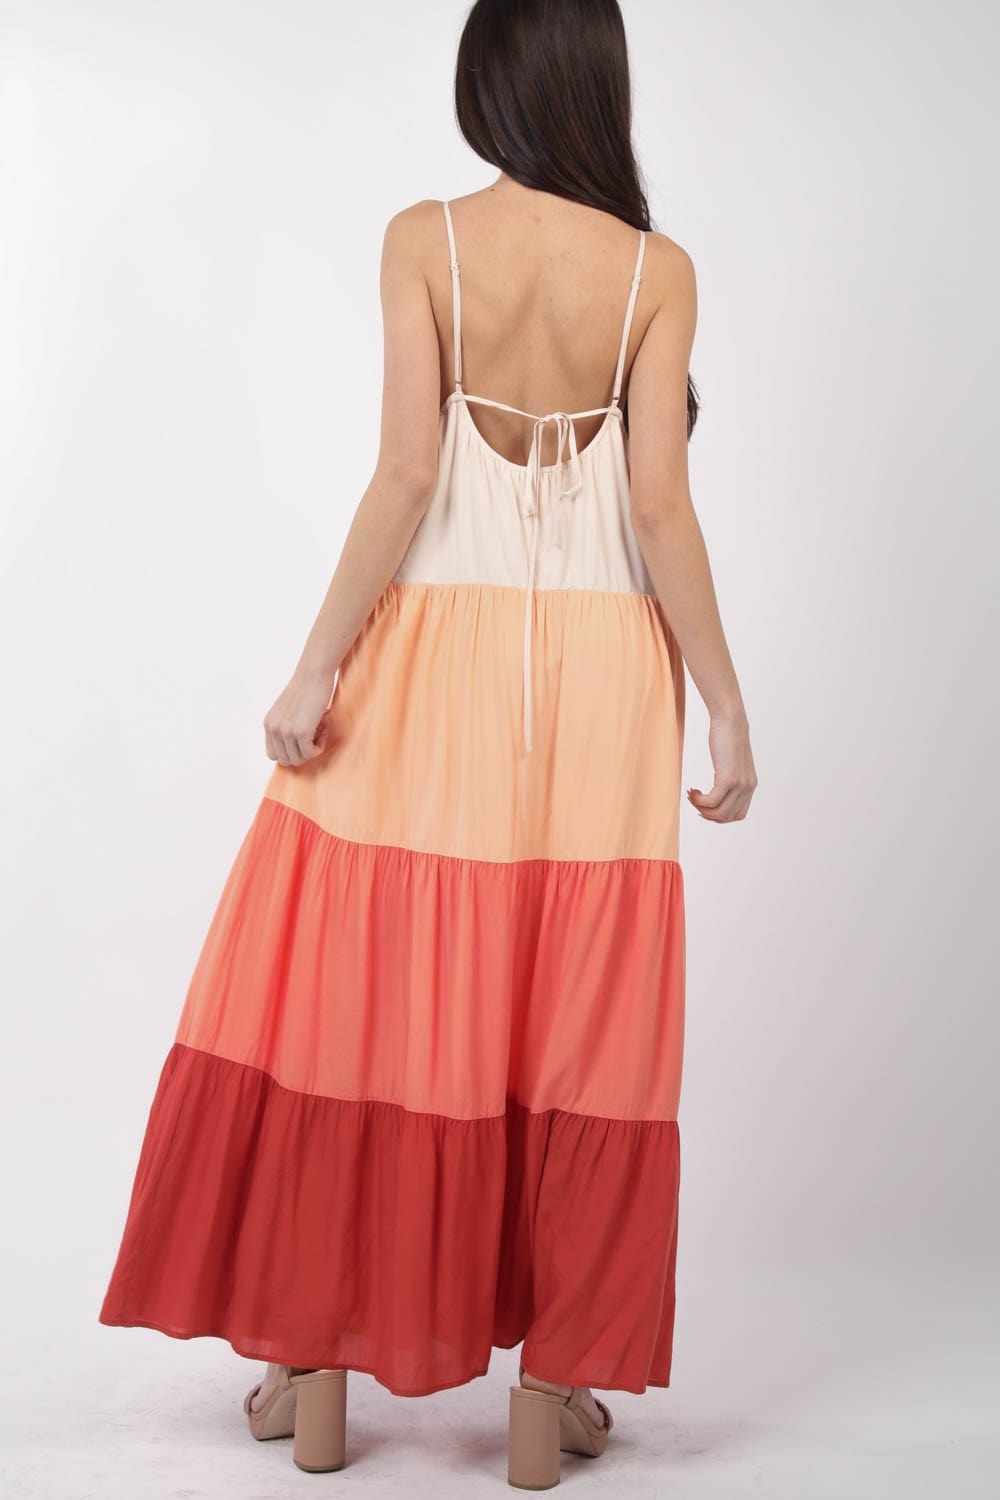  A color block tiered maxi cami dress by Unique Kulture, showcasing vibrant hues and flattering silhouette for a chic summer look."